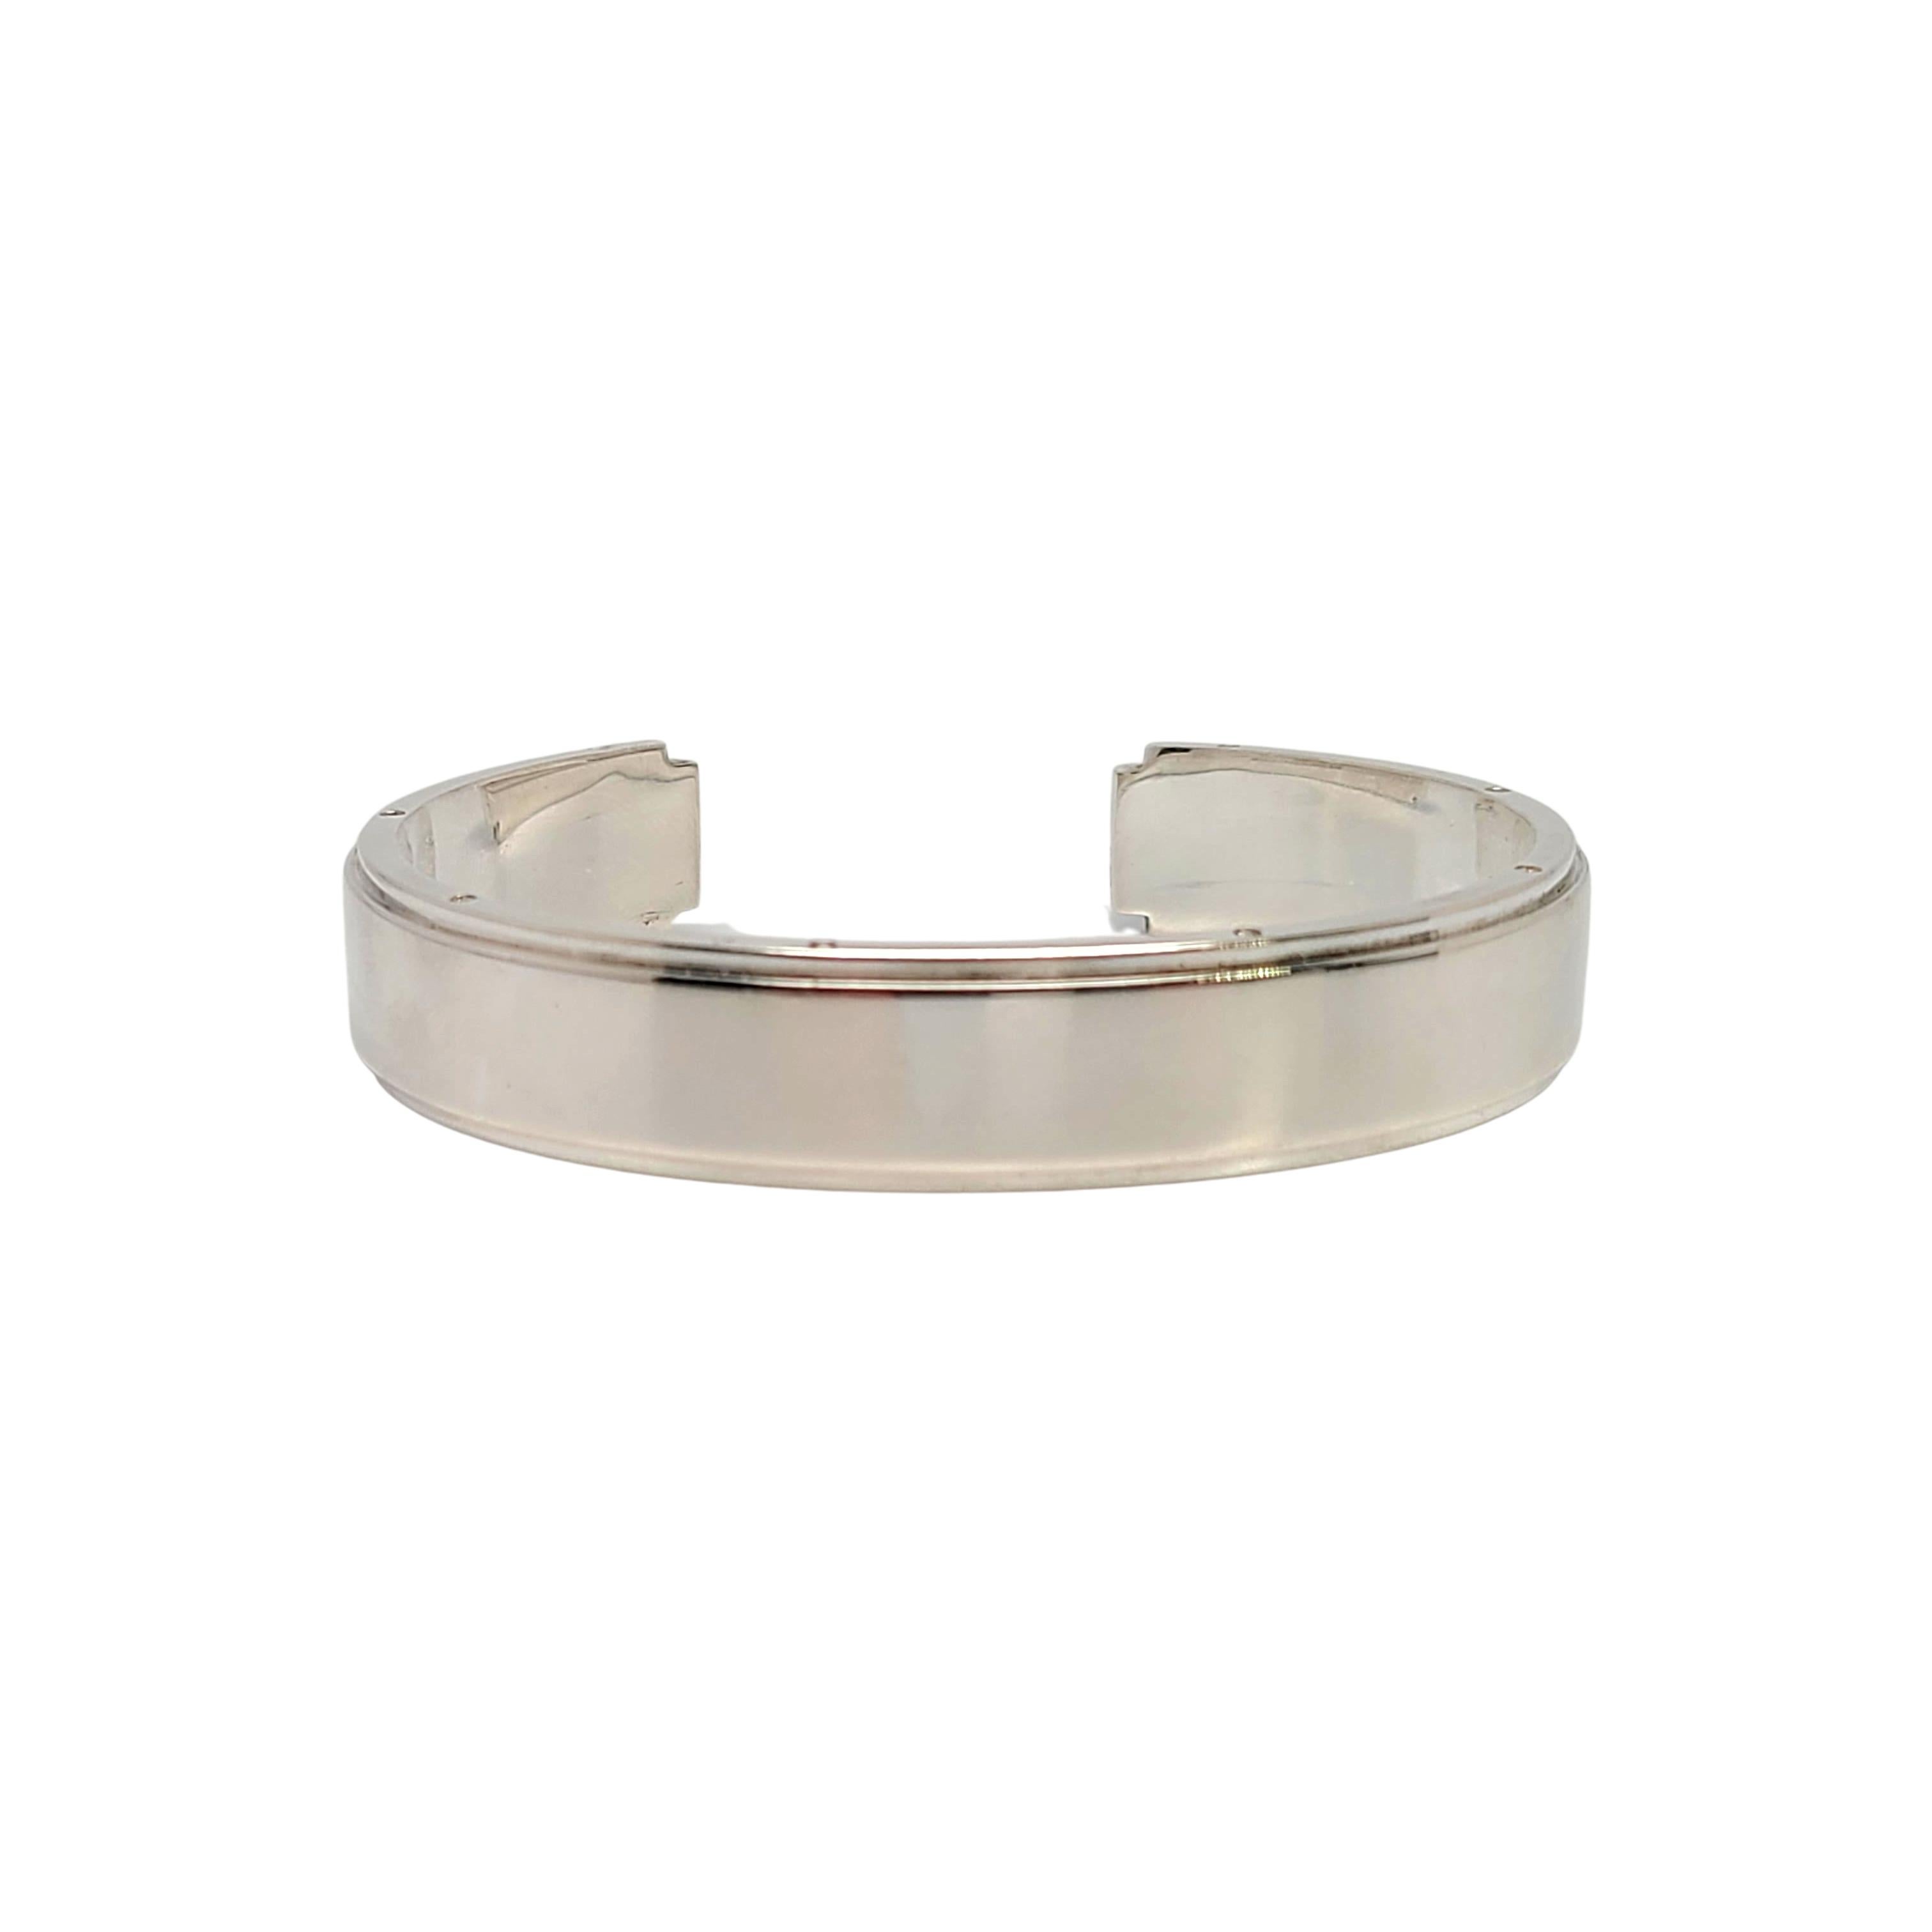 Tiffany & Co sterling silver Metropolis cuff bracelet.

Authentic Tiffany sterling silver Metropolis cuff features a polished center, recessed edges and small rivet screws all around the edges on both sides of the ring. Tiffany pouch and box not